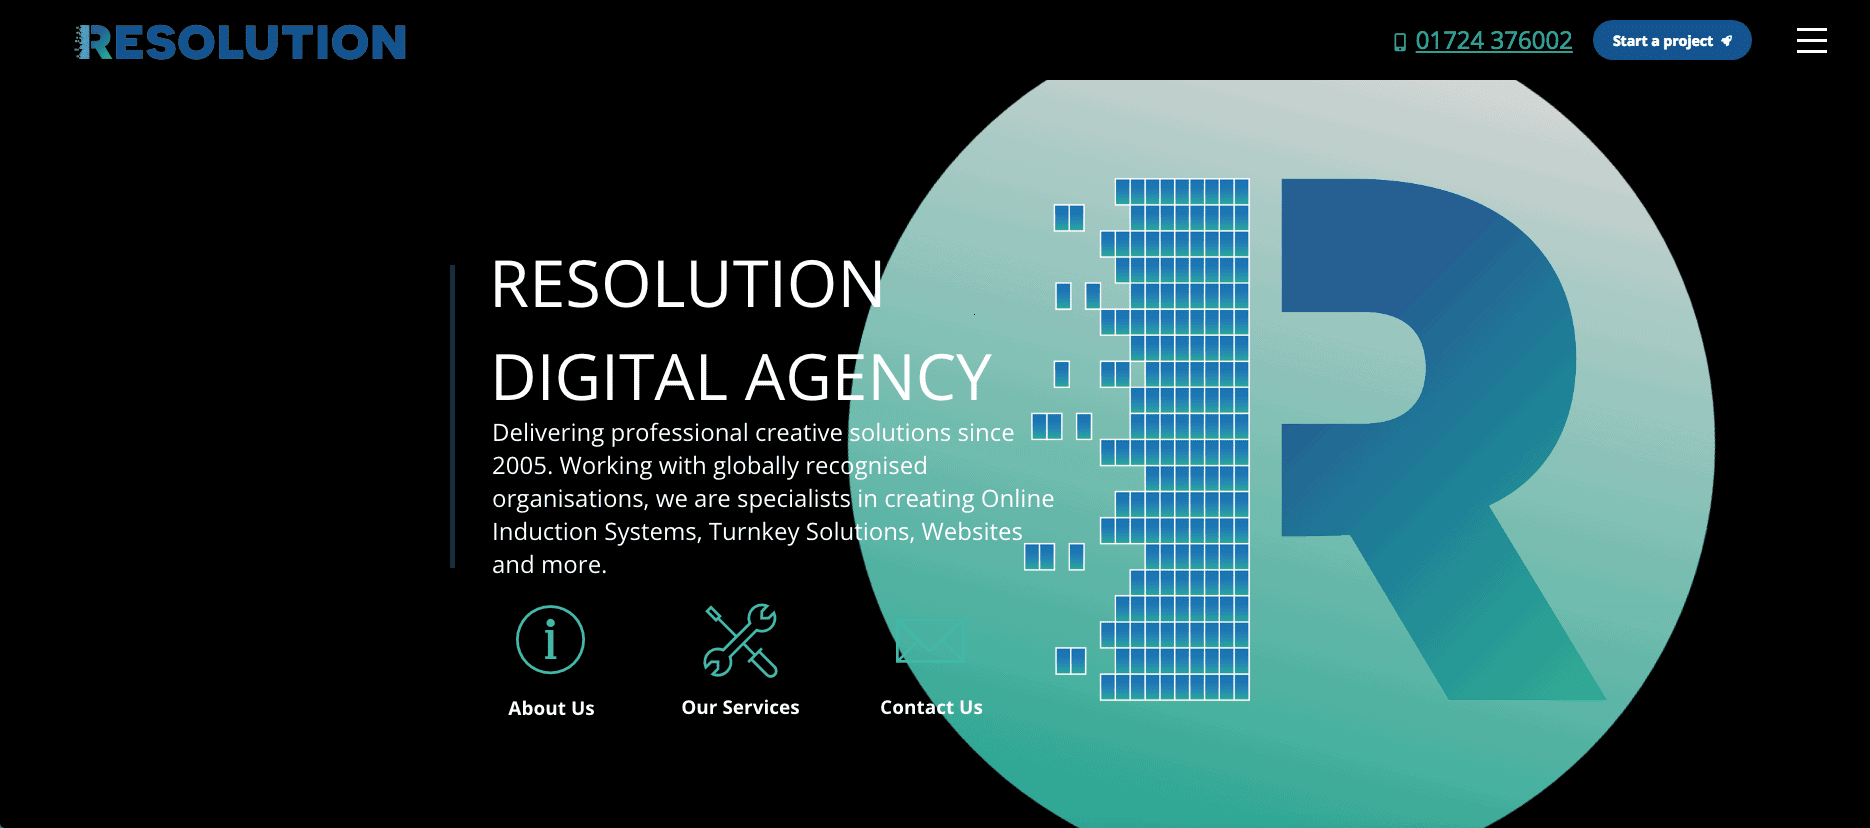 Welcome To The New Resolution Website | Resolution Digital